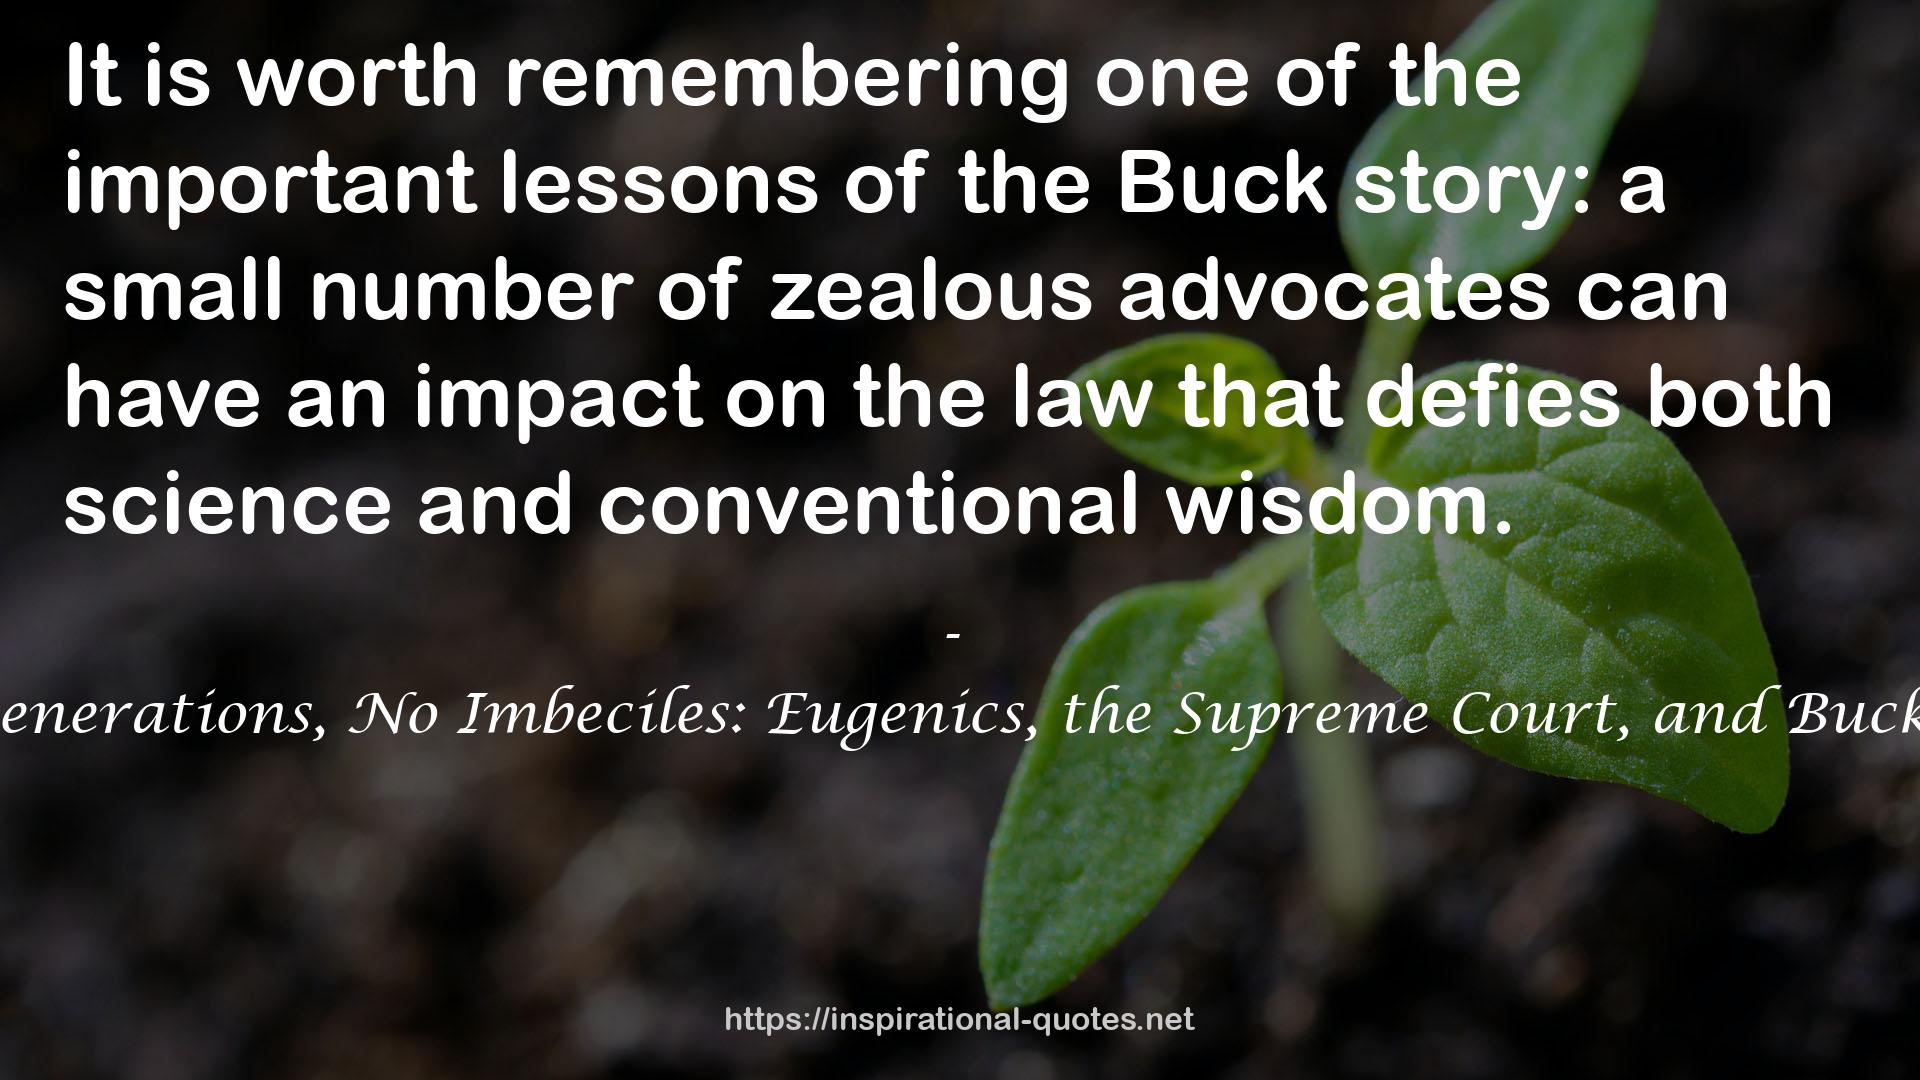 Three Generations, No Imbeciles: Eugenics, the Supreme Court, and Buck v. Bell QUOTES